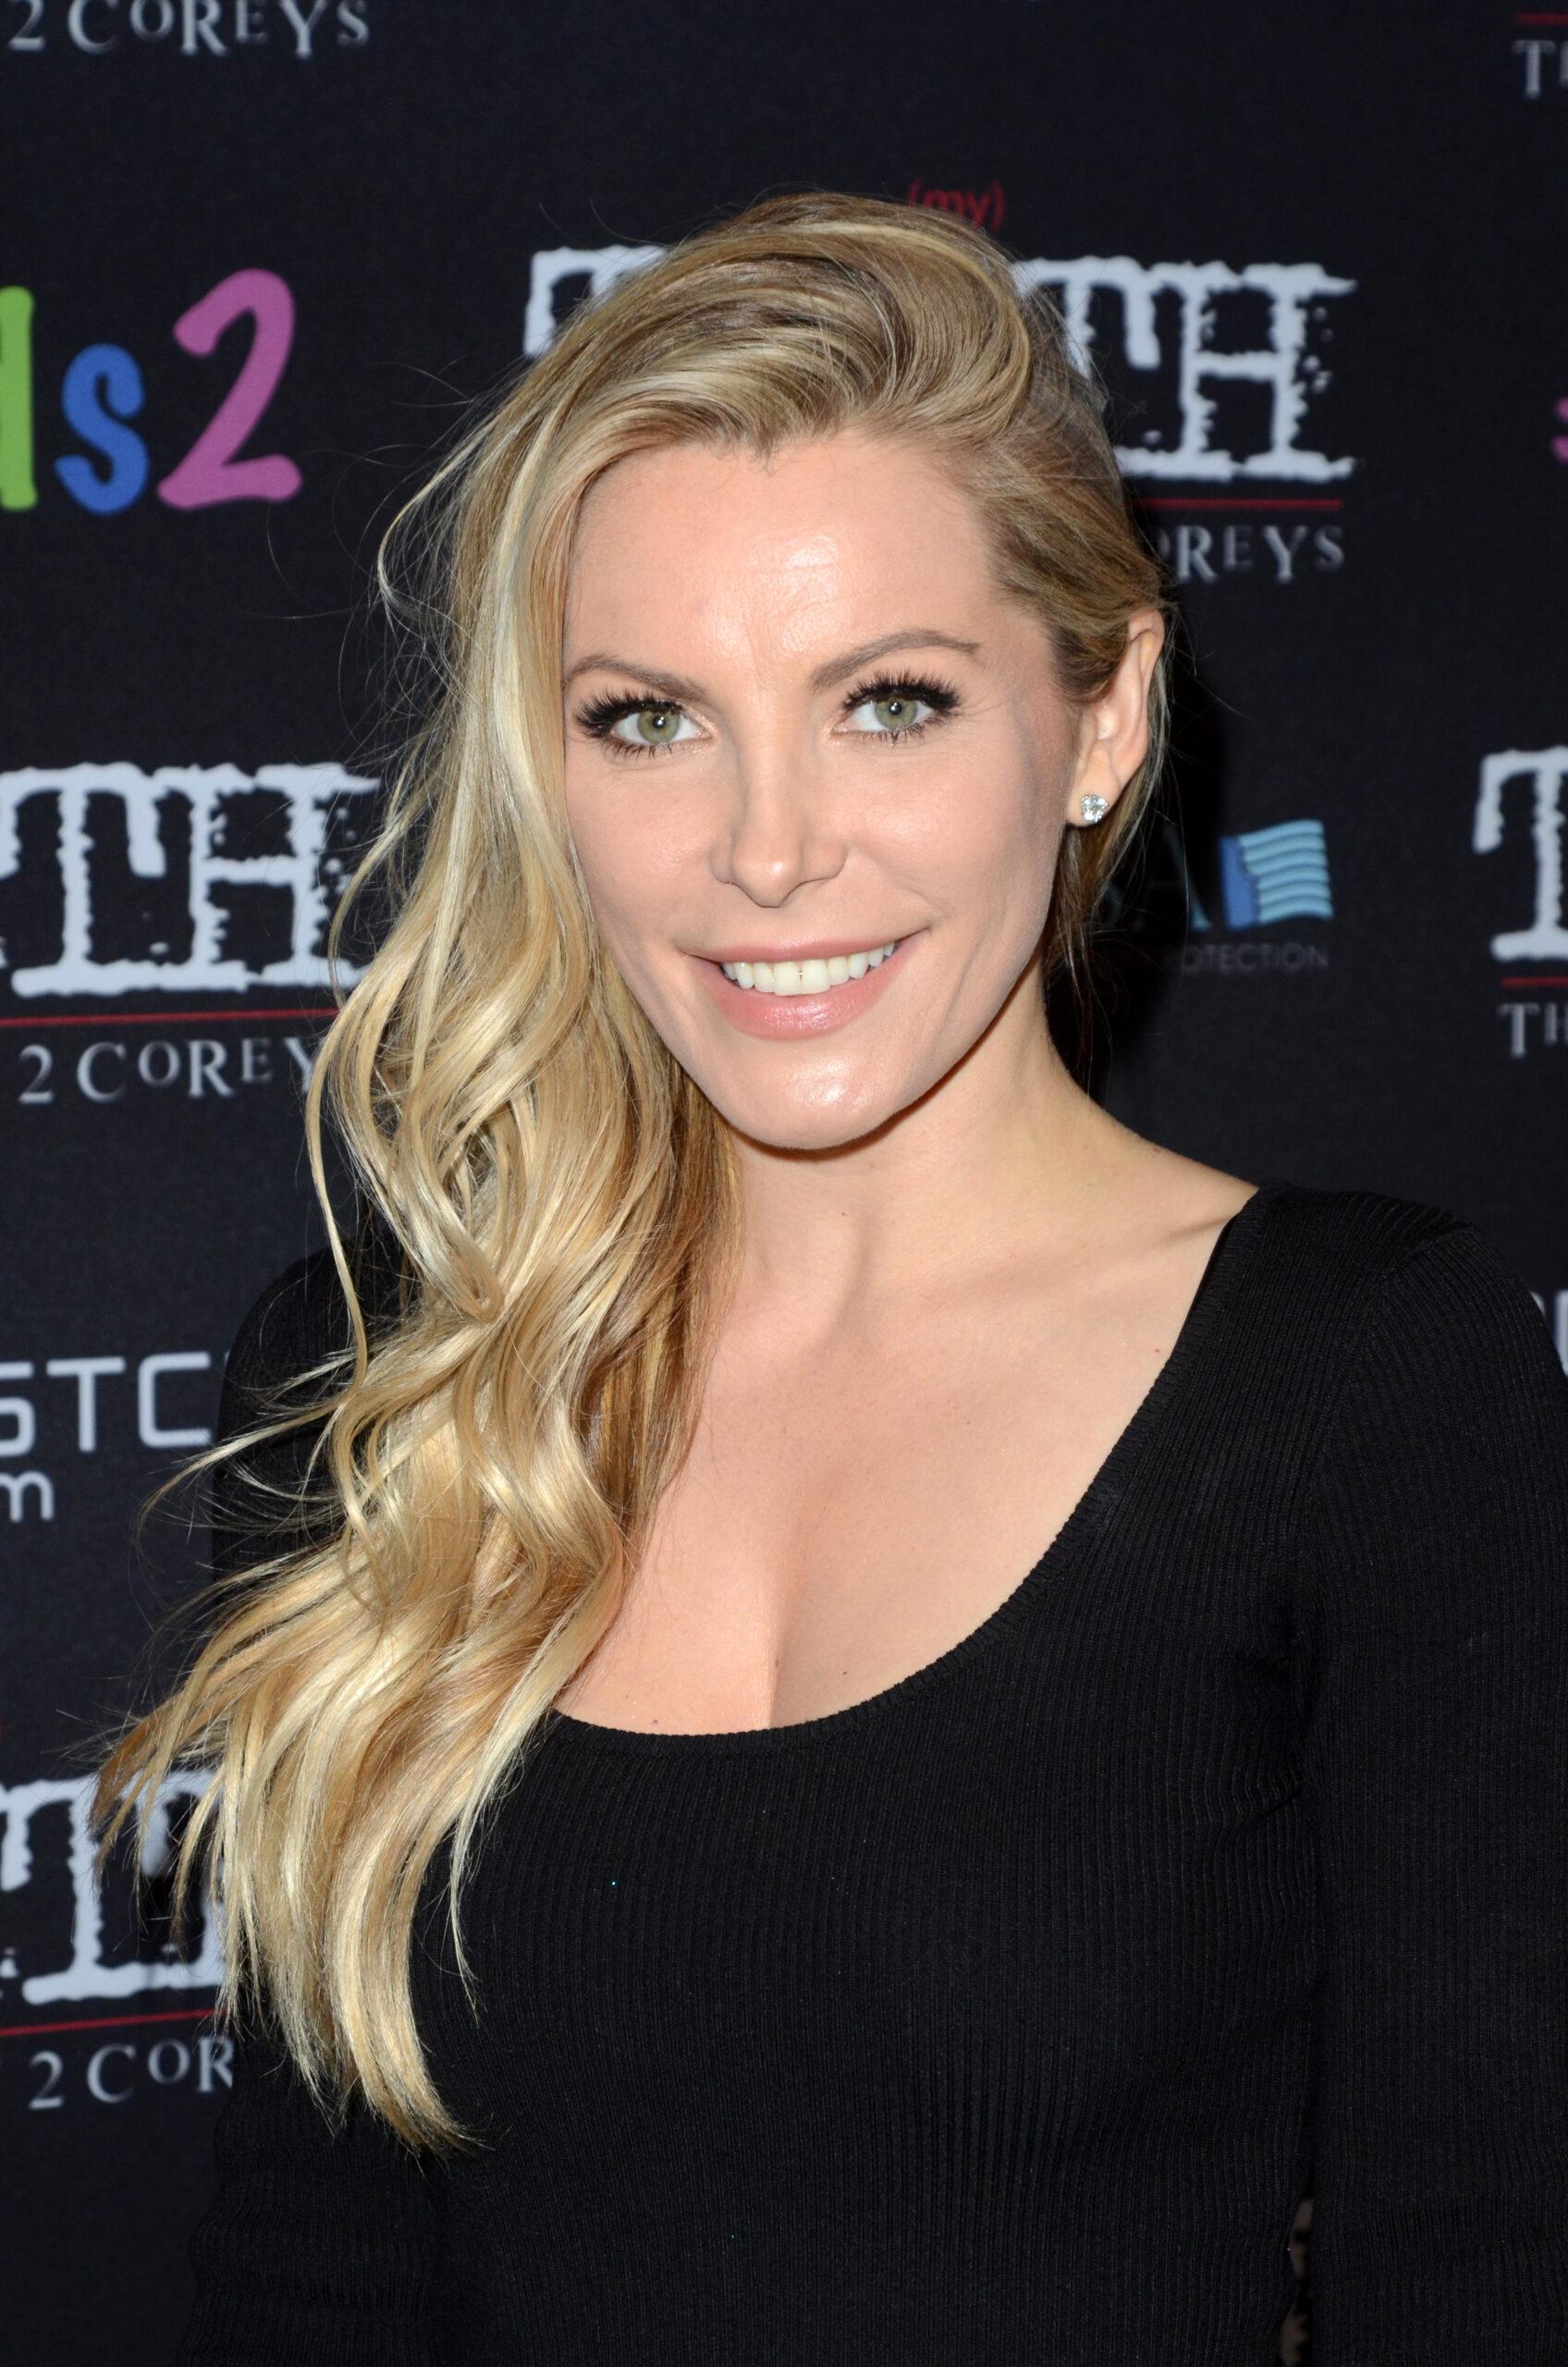 Crystal Hefner attends USA - "(My) Truth: The Rape of 2 Coreys" L.A. Premiere - Los Angeles